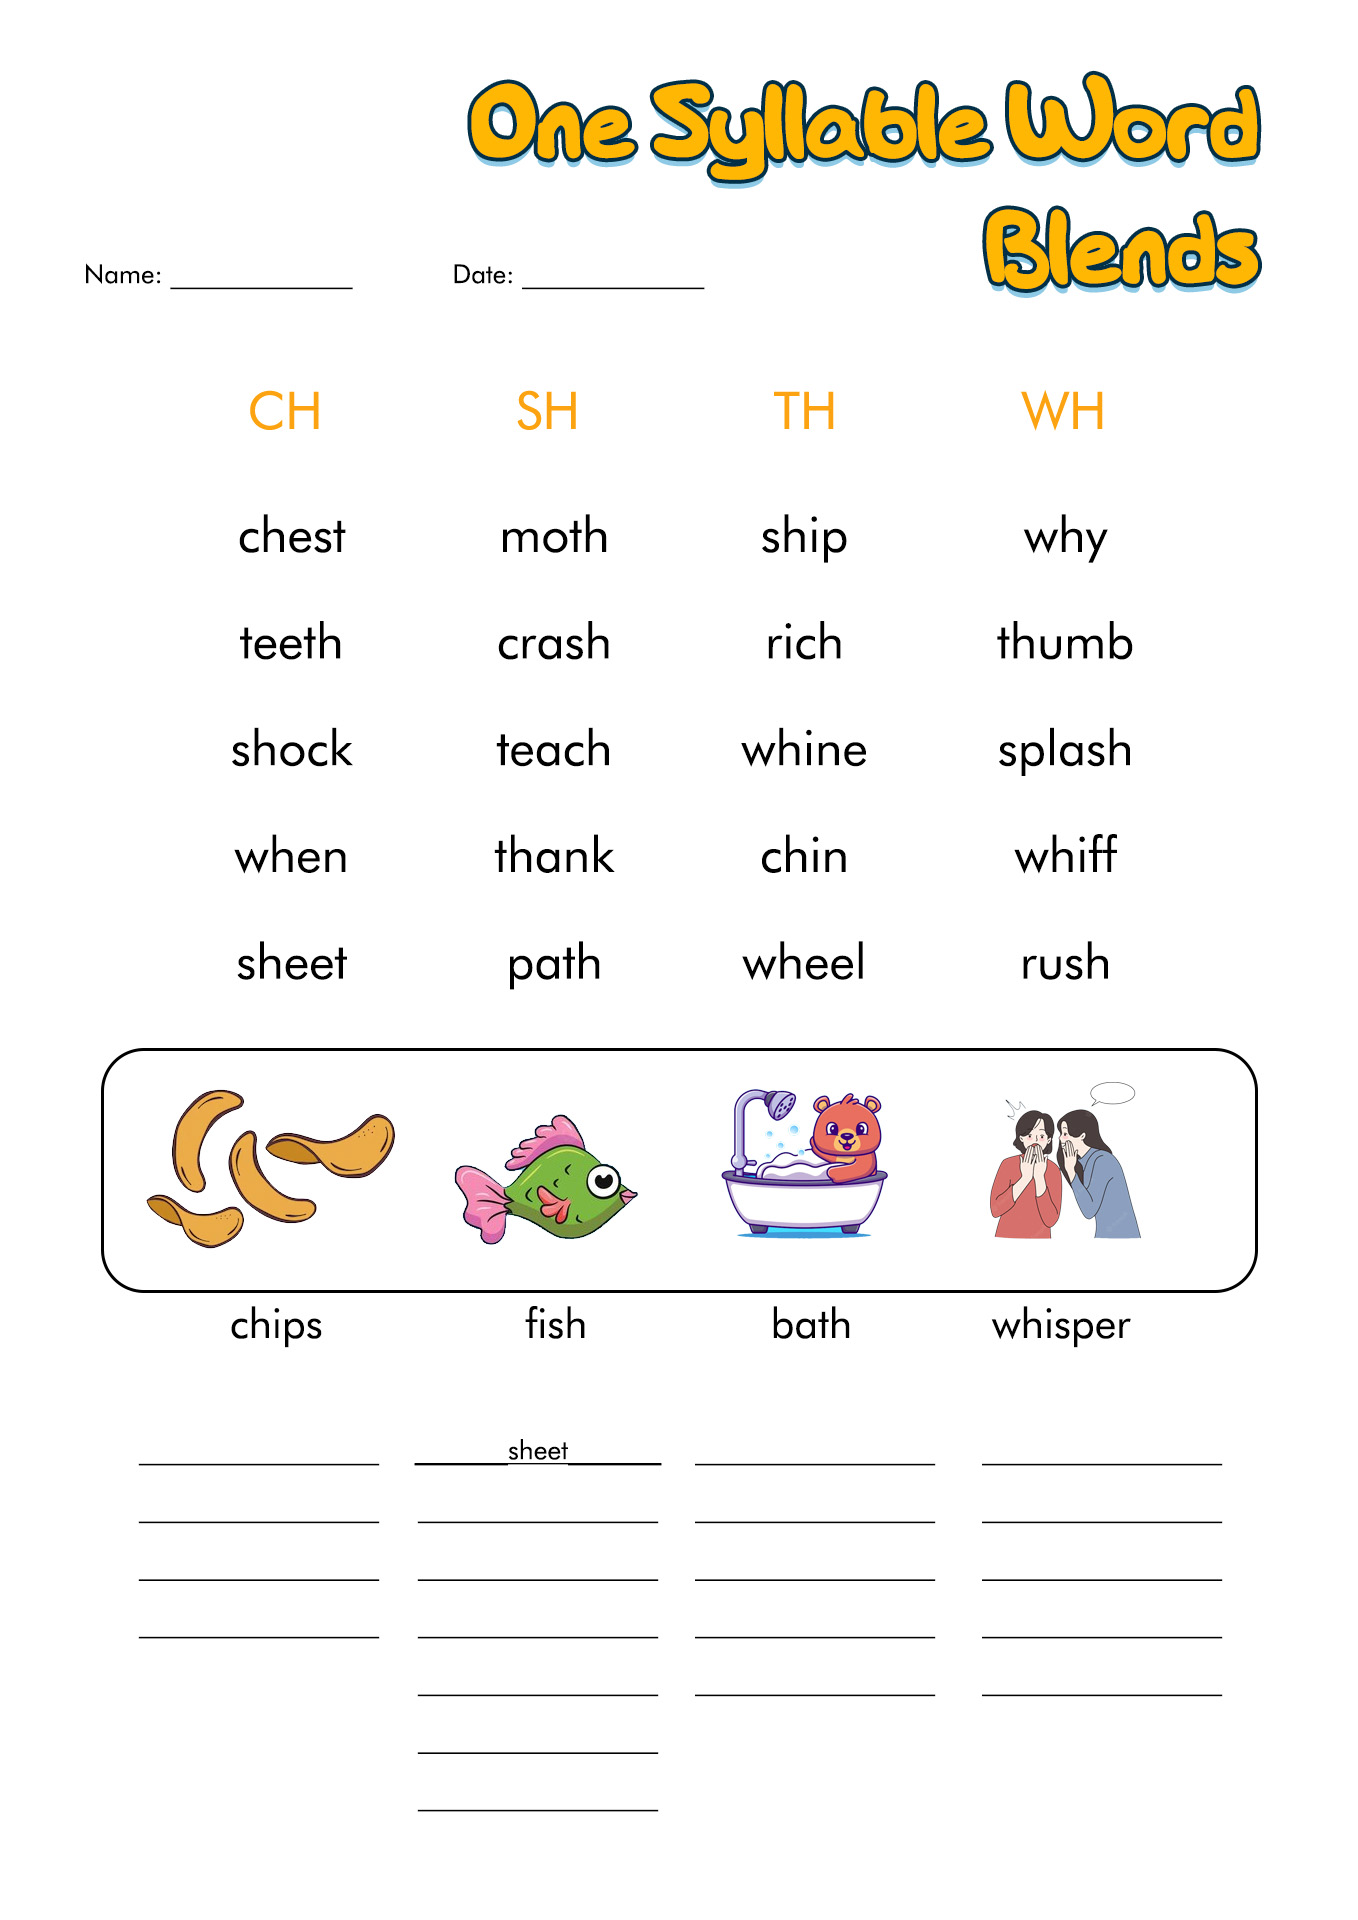 One Syllable Word Blends Worksheets Image